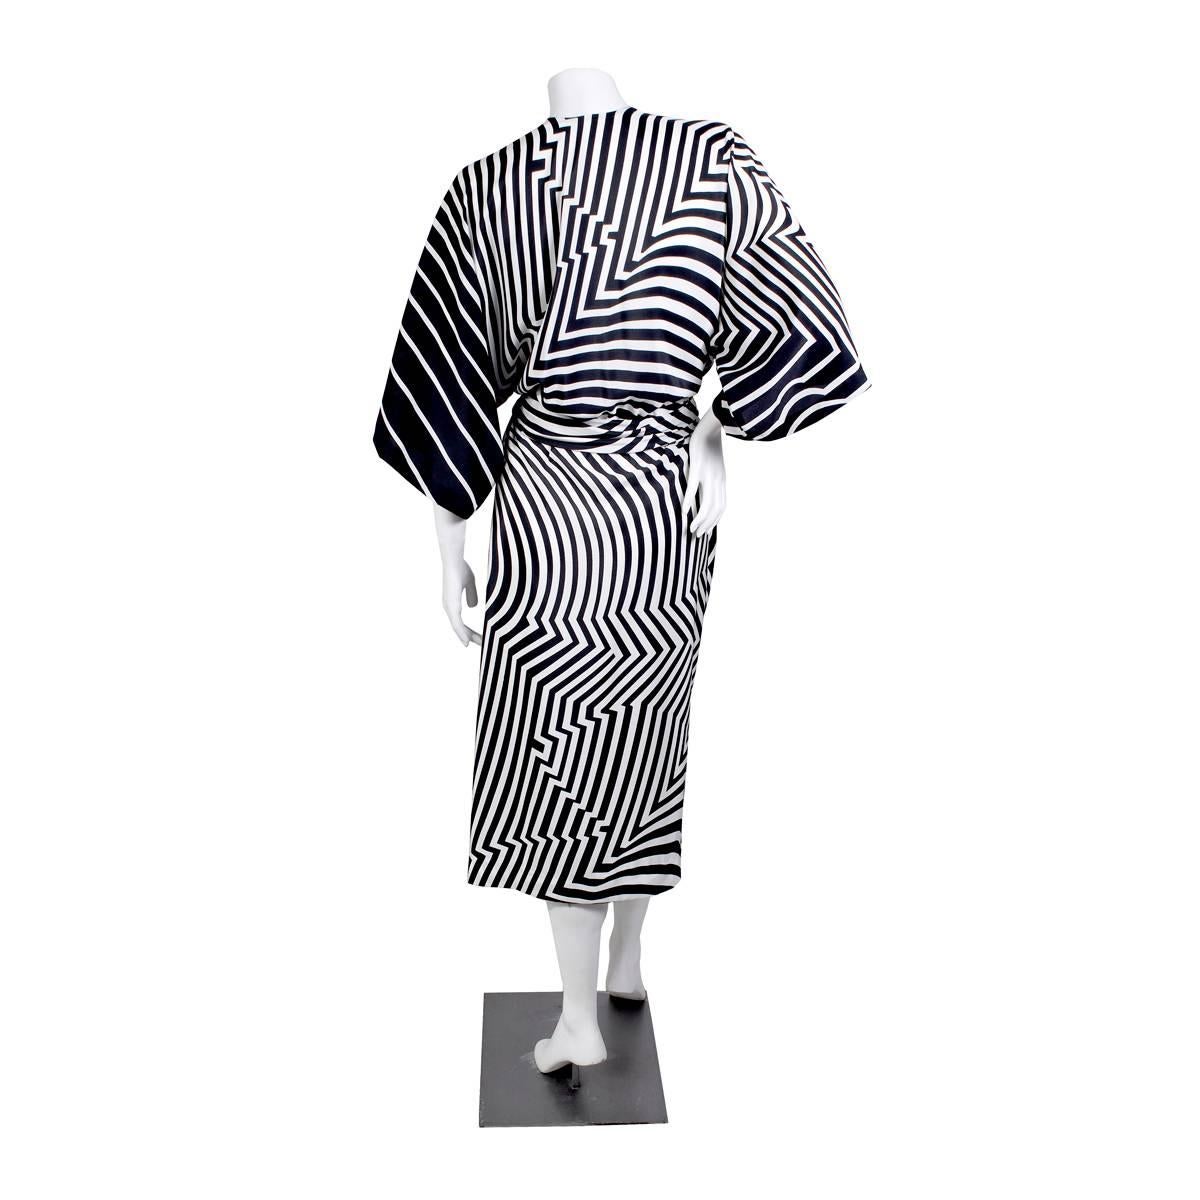 Vintage dress by Halston circa 1970s
Wrap style dress with hook closures inside waist
Kimono sleeves
Black and white graphic line print
Includes matching belt
Condition: Excellent vintage condition
Size/Measurements:
42